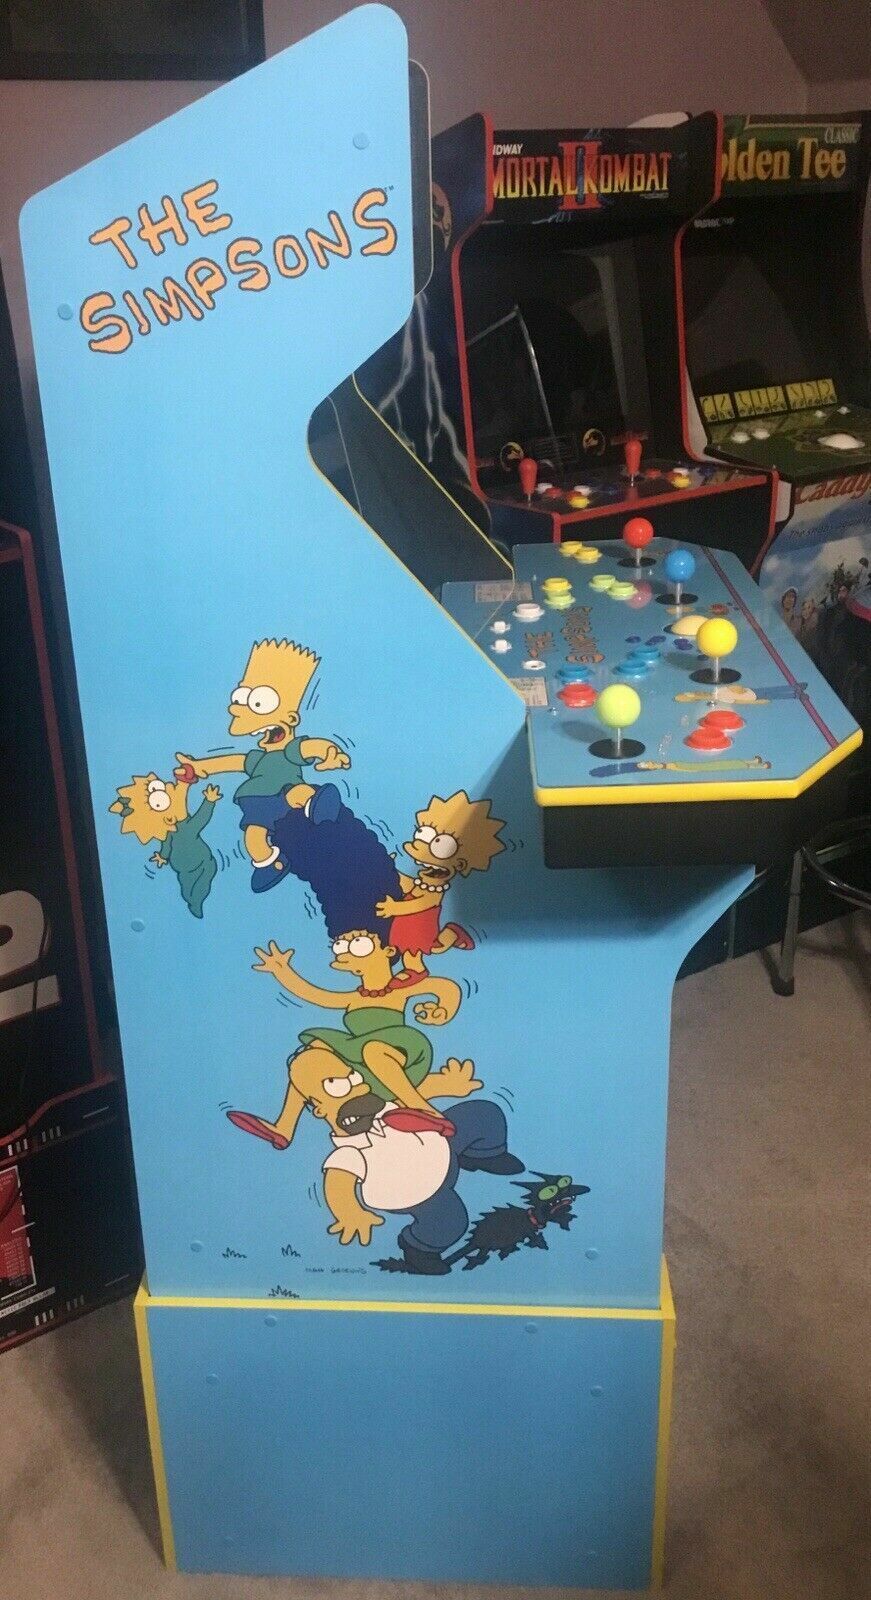 Arcade1up  - The Simpsons - Screw Hole Caps/Covers